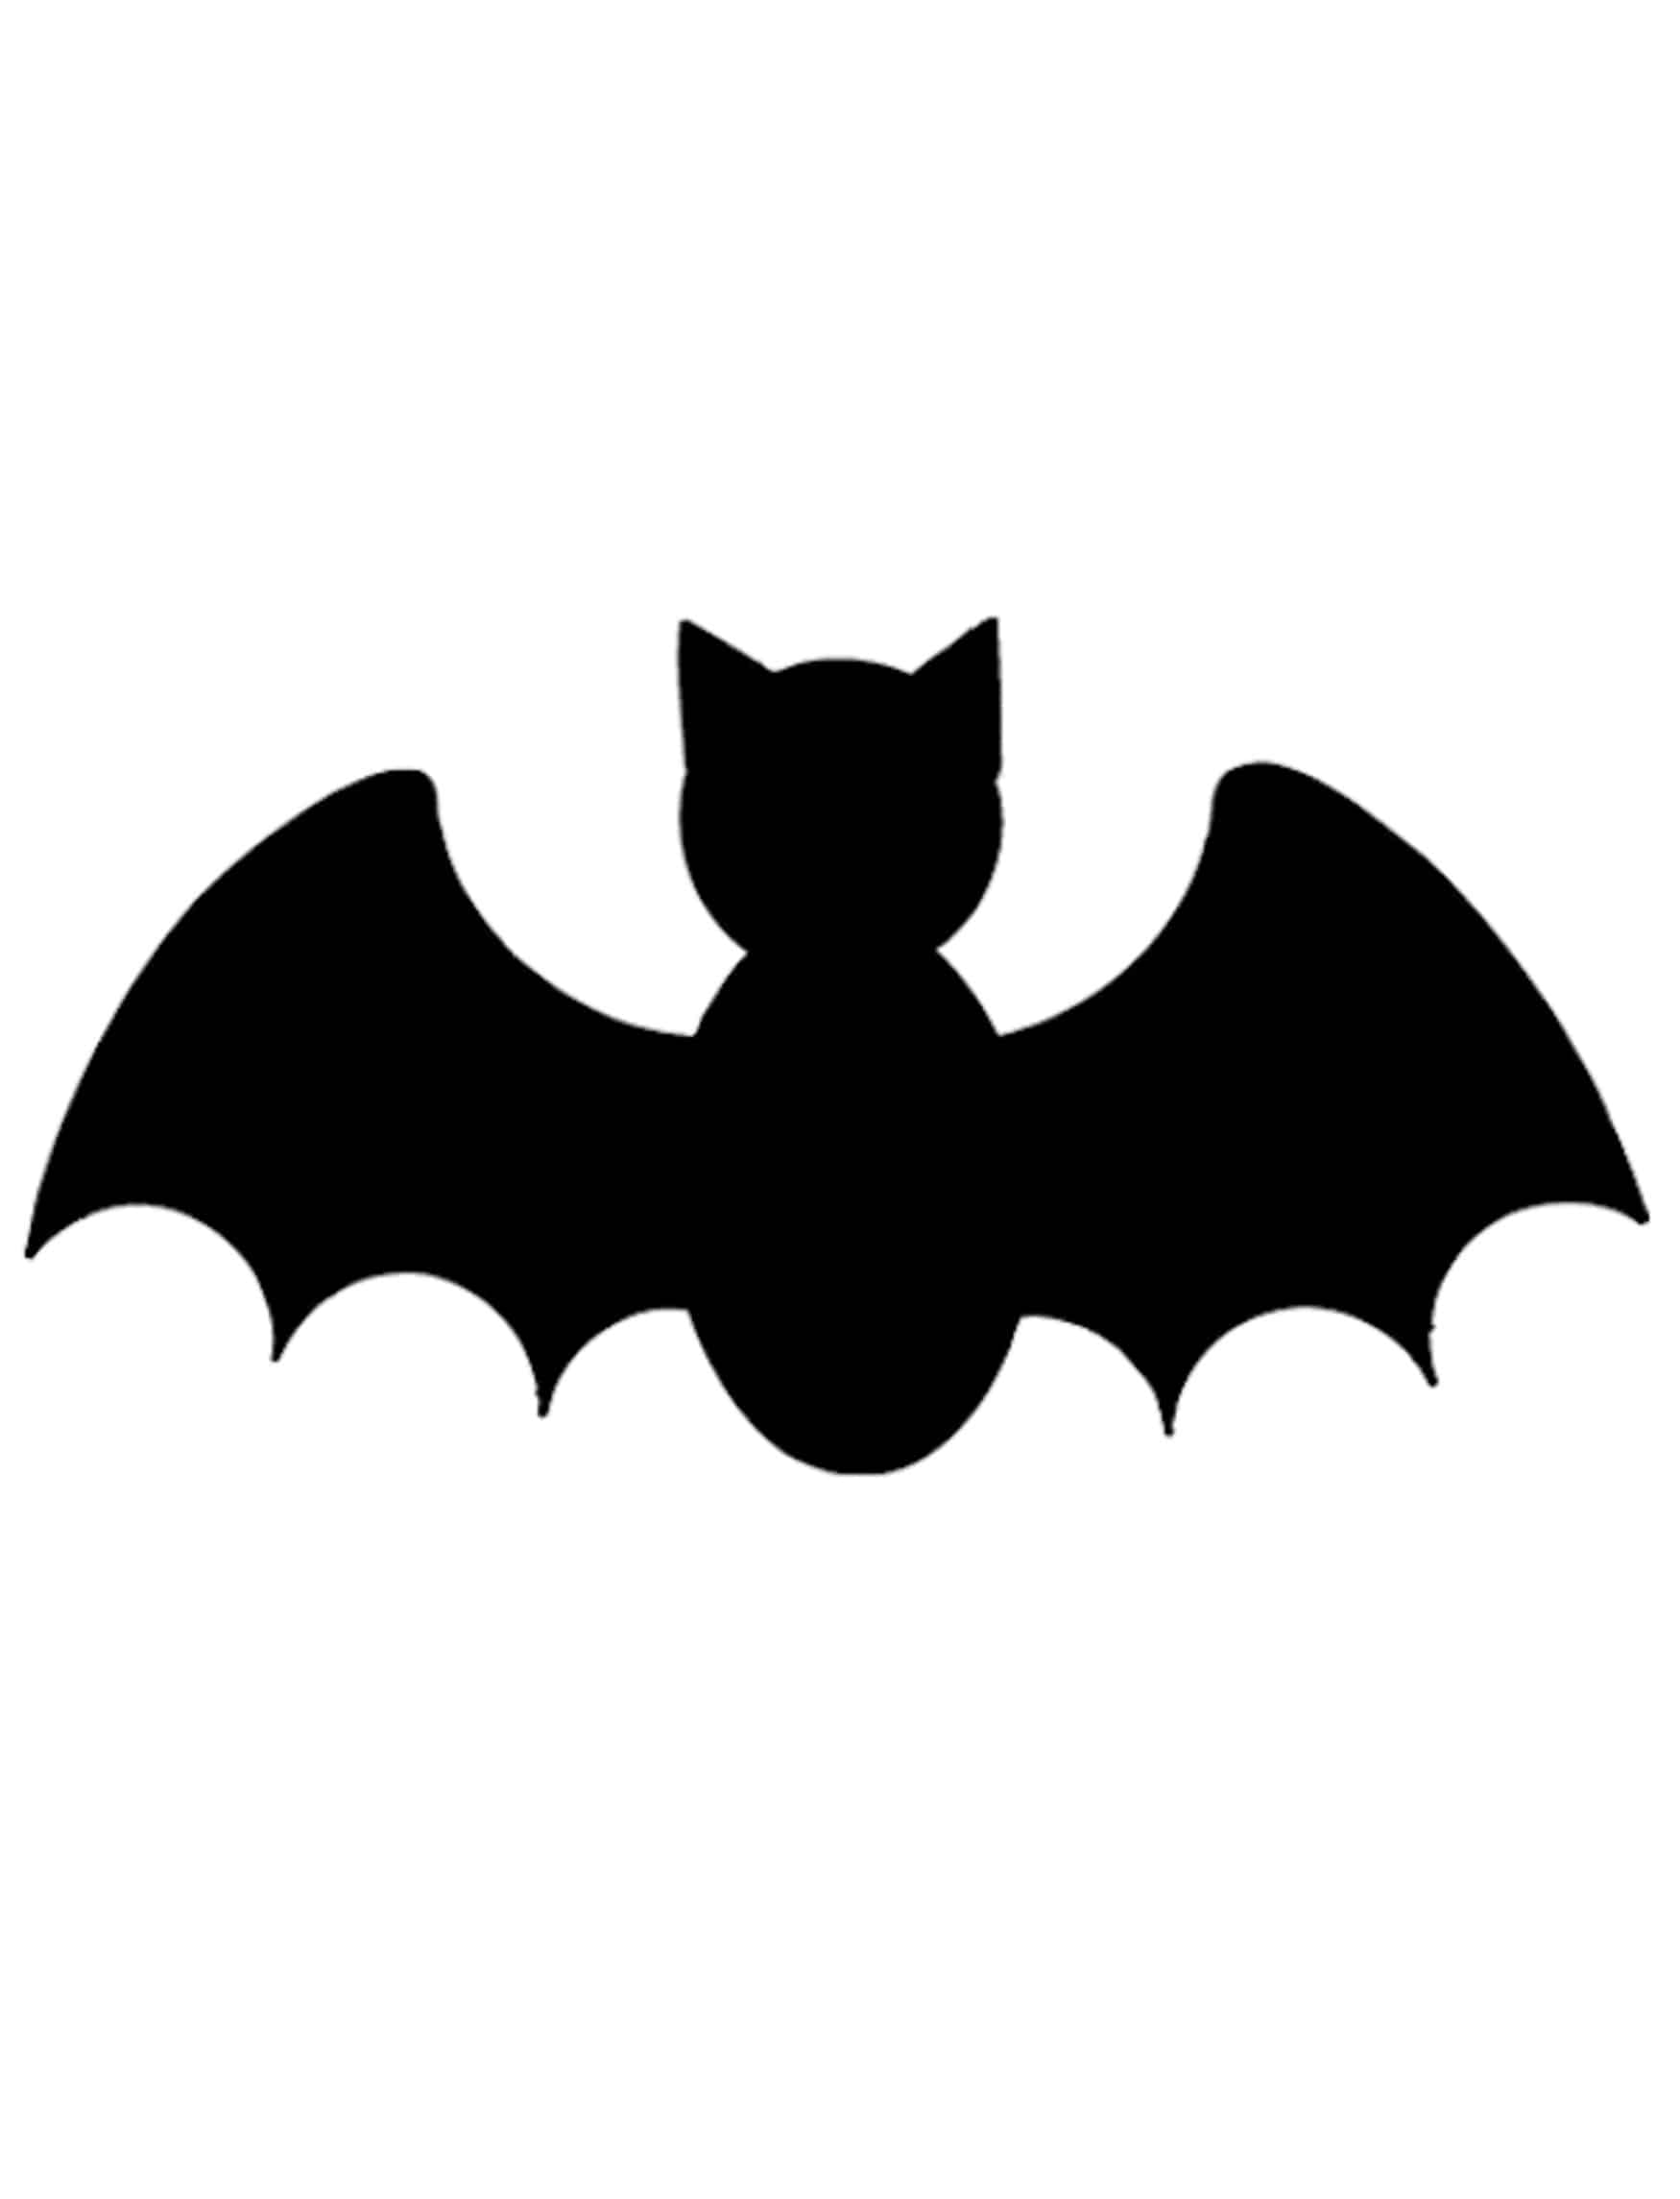 Simple Bat Pumpkin Carving Pattern Creative Ads and more...